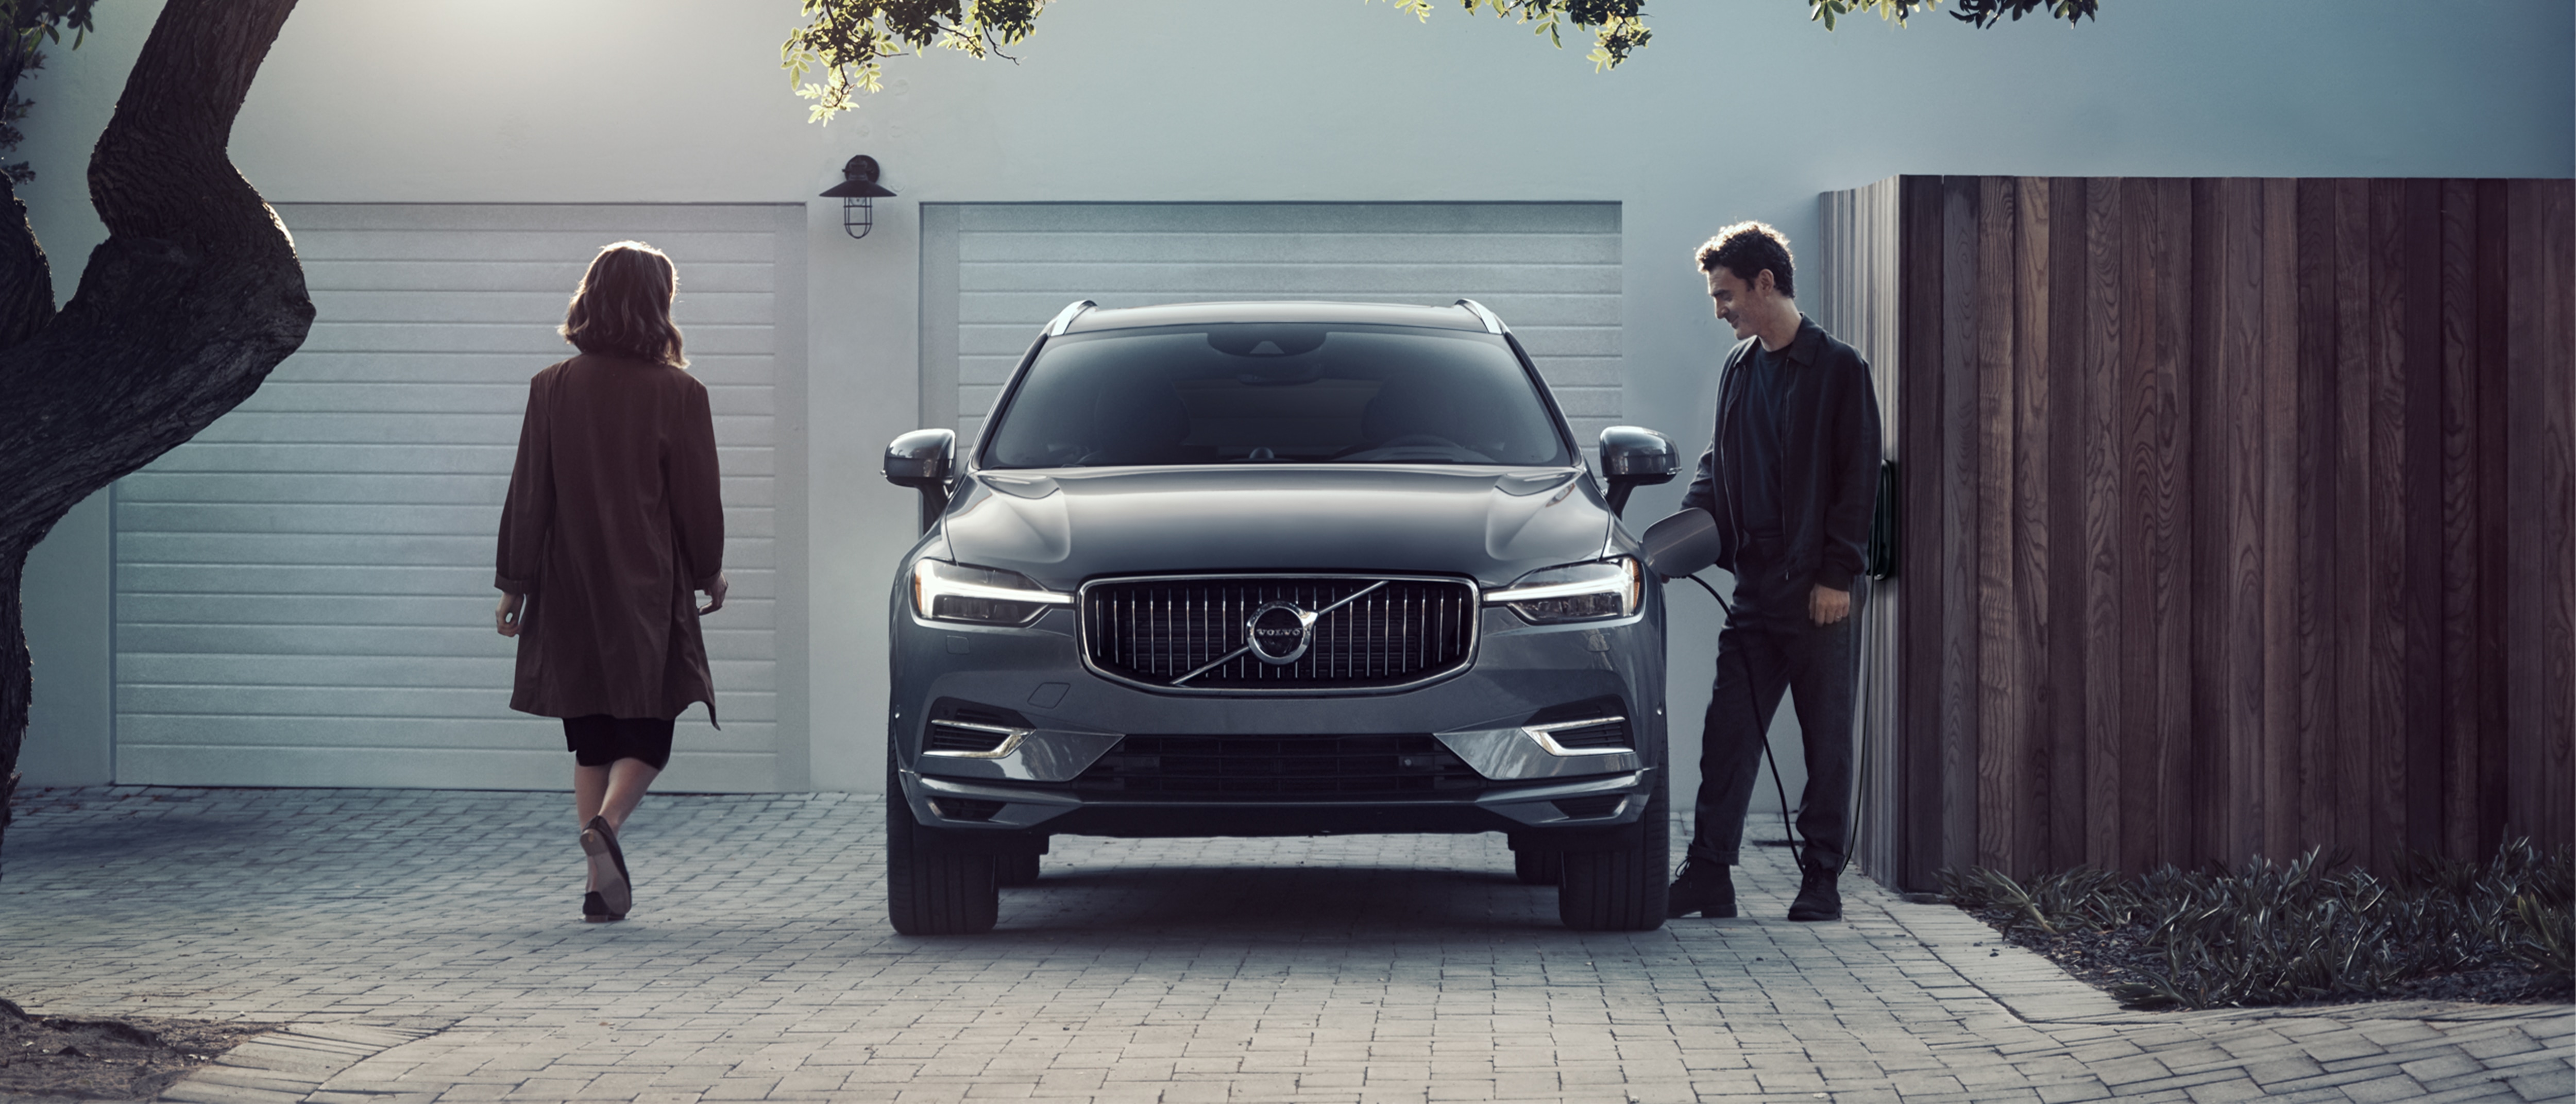 Man charging Volvo SUV front view